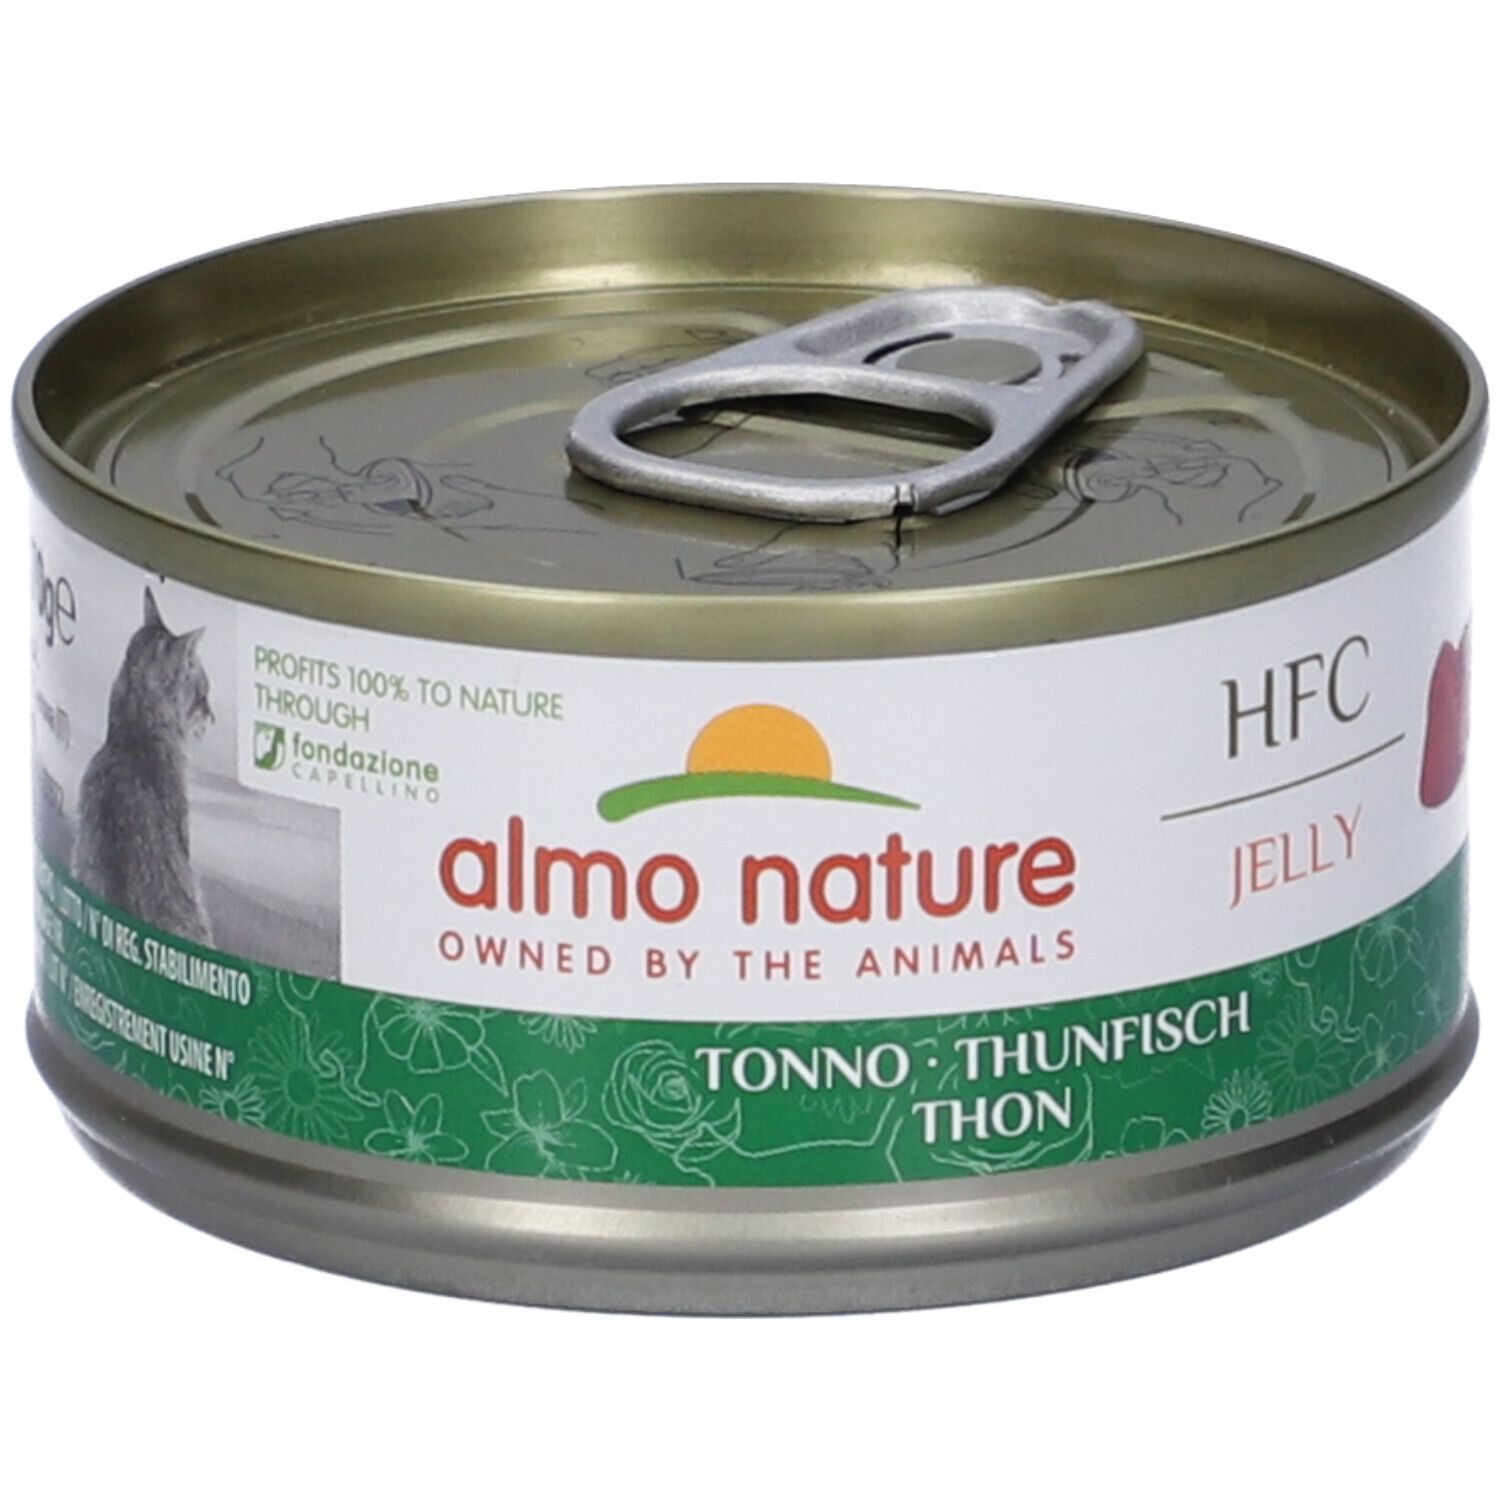 Image of Almo Nature HFC Cat Jelly Tonno